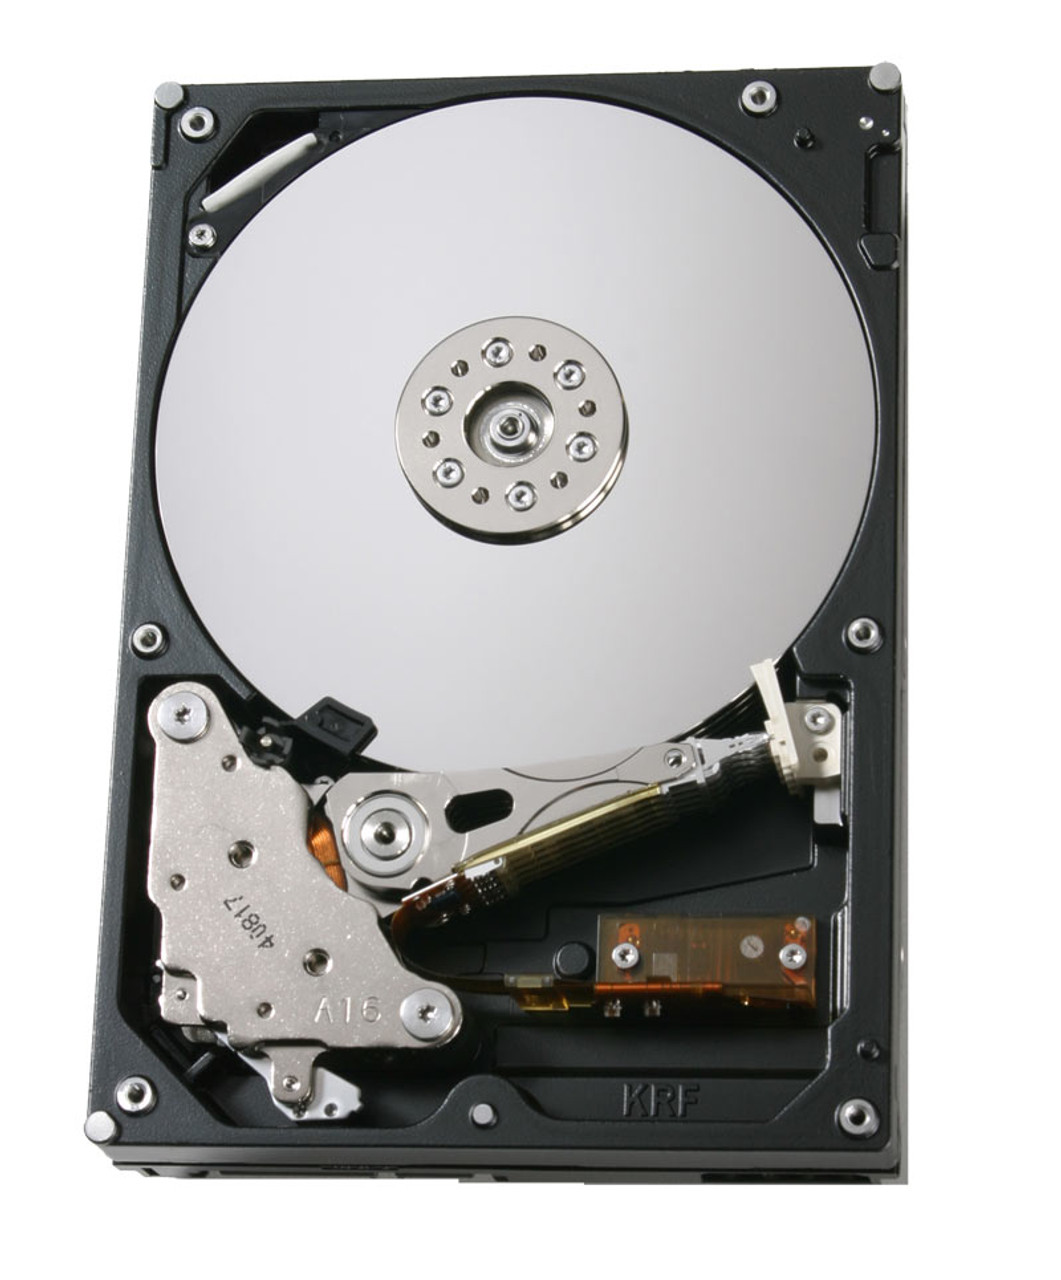 【パーツ】3.5 SATA 3TB 1台 正常 Hitachi HDS723030ALA640 使用時間71185H ■HDD1491